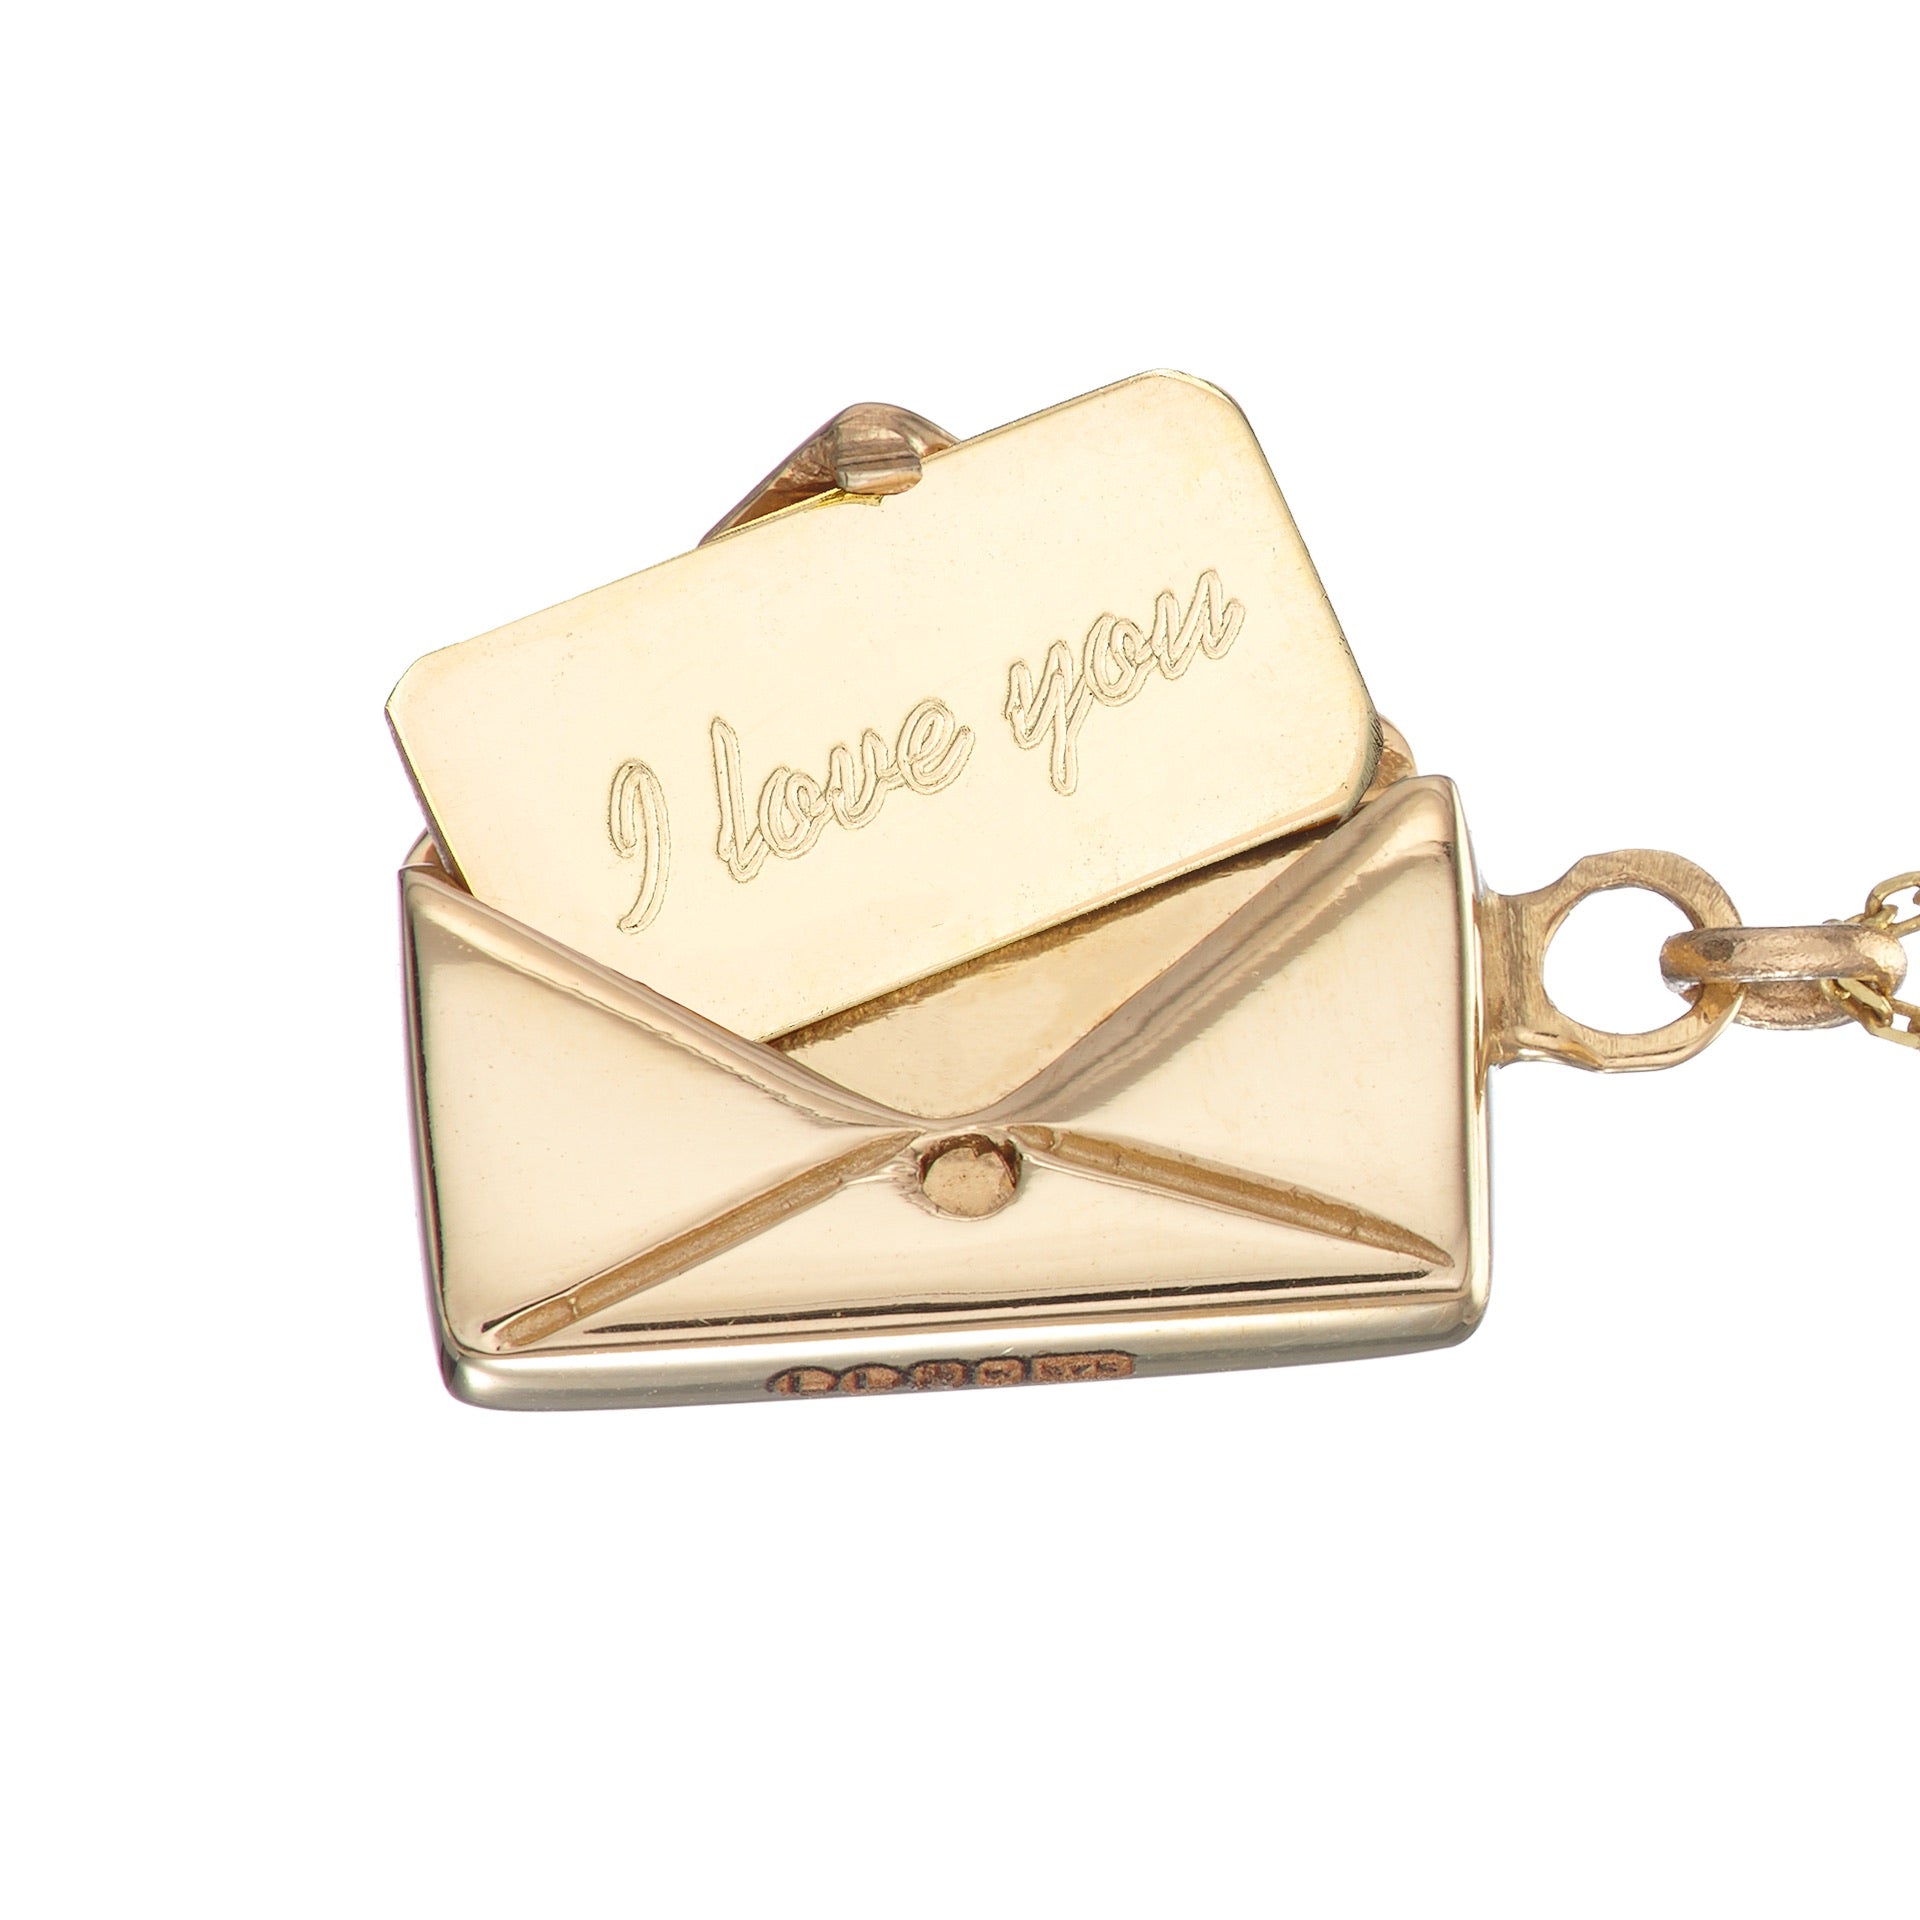 ‘I love you’ Signature Envelope Necklace - 18ct Gold